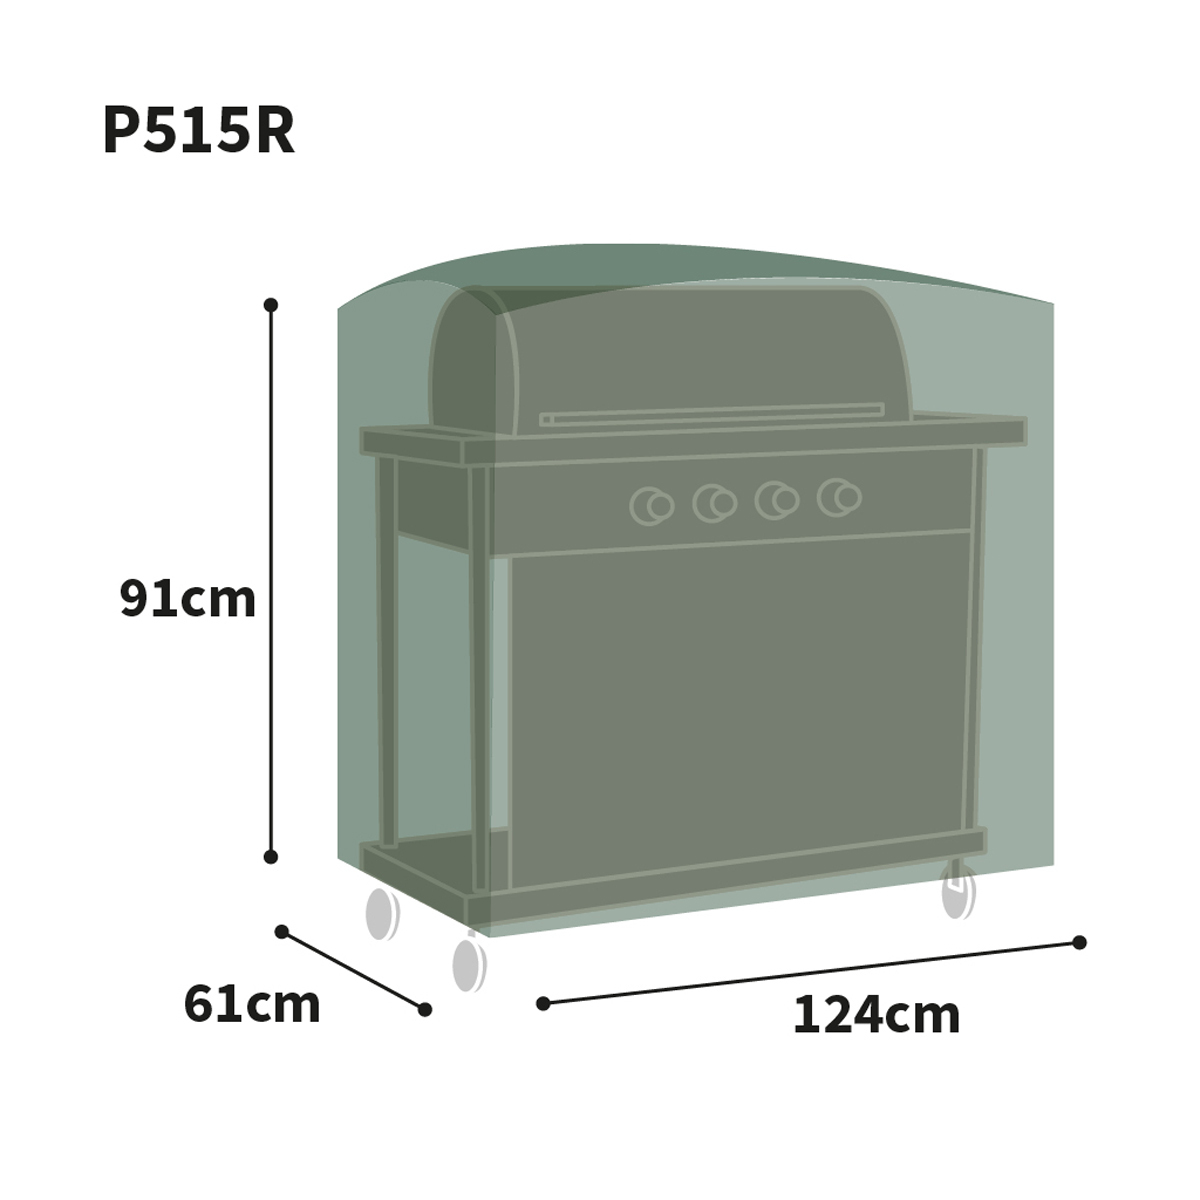 Bosmere Protector Wagon Barbeque Cover Graphic Size Guide